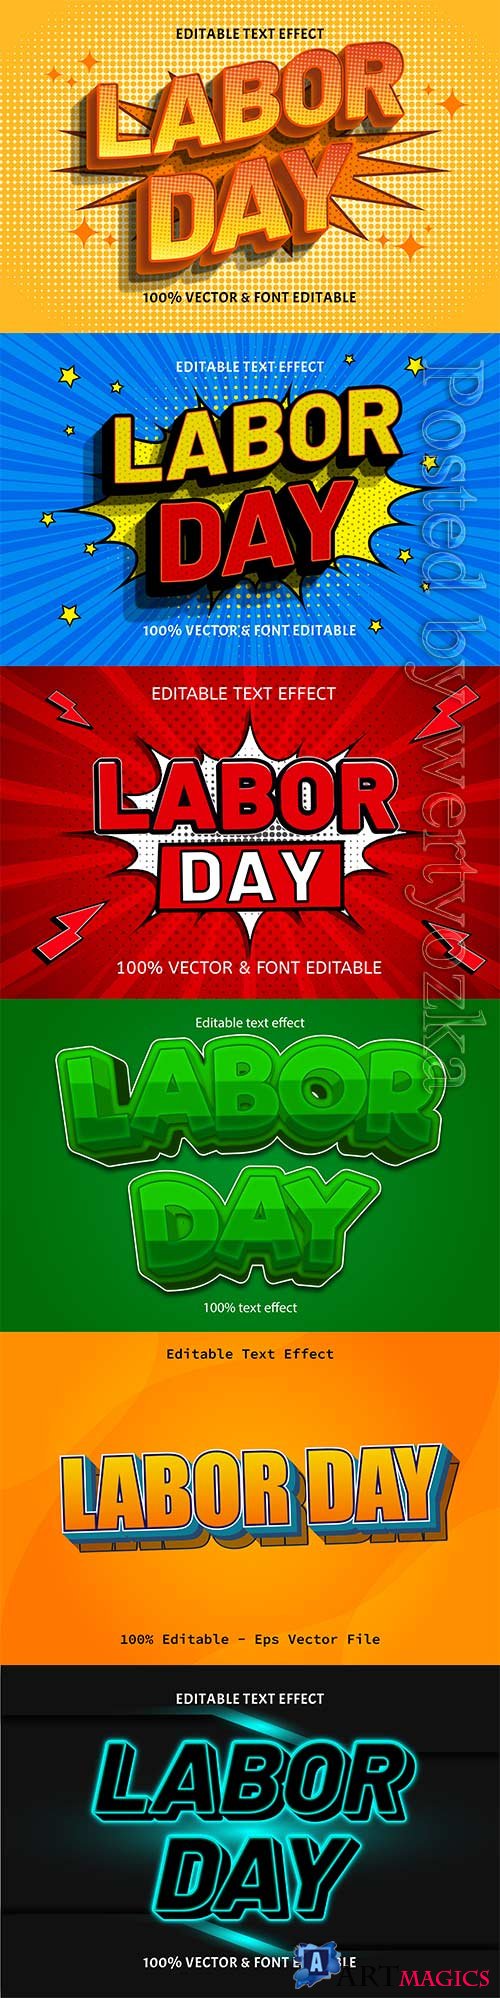 Labor day editable text effect vol 9